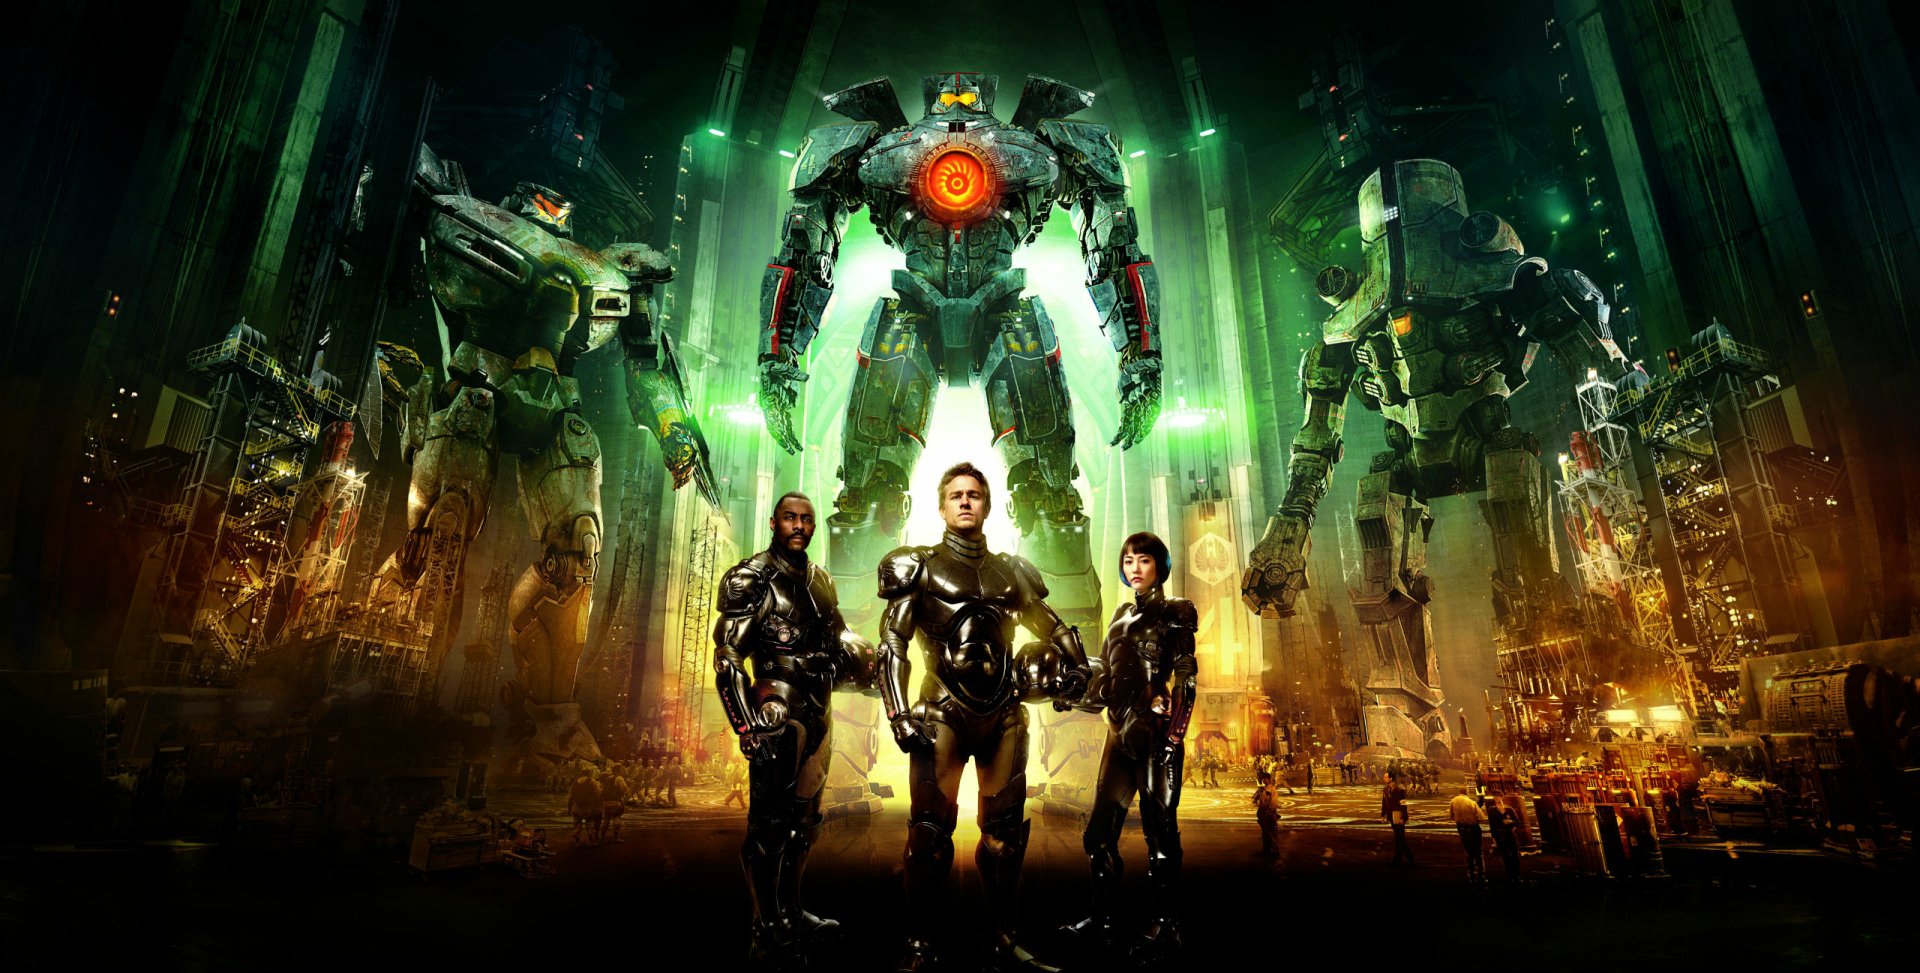 HD desktop wallpaper from the movie Pacific Rim featuring three characters in combat suits standing before a giant robot in a neon-lit hangar.